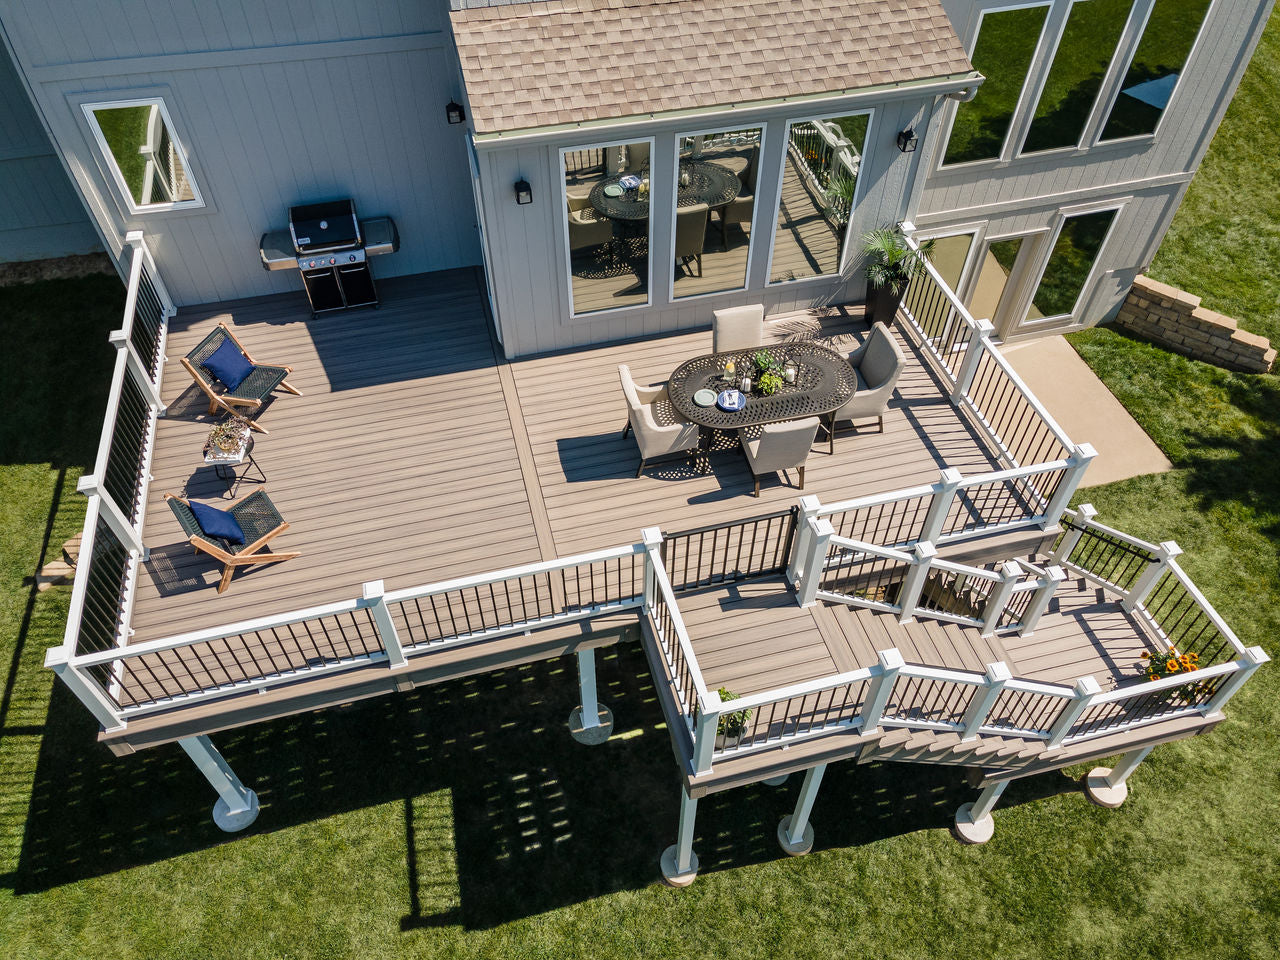 Composite wood decking from Trex